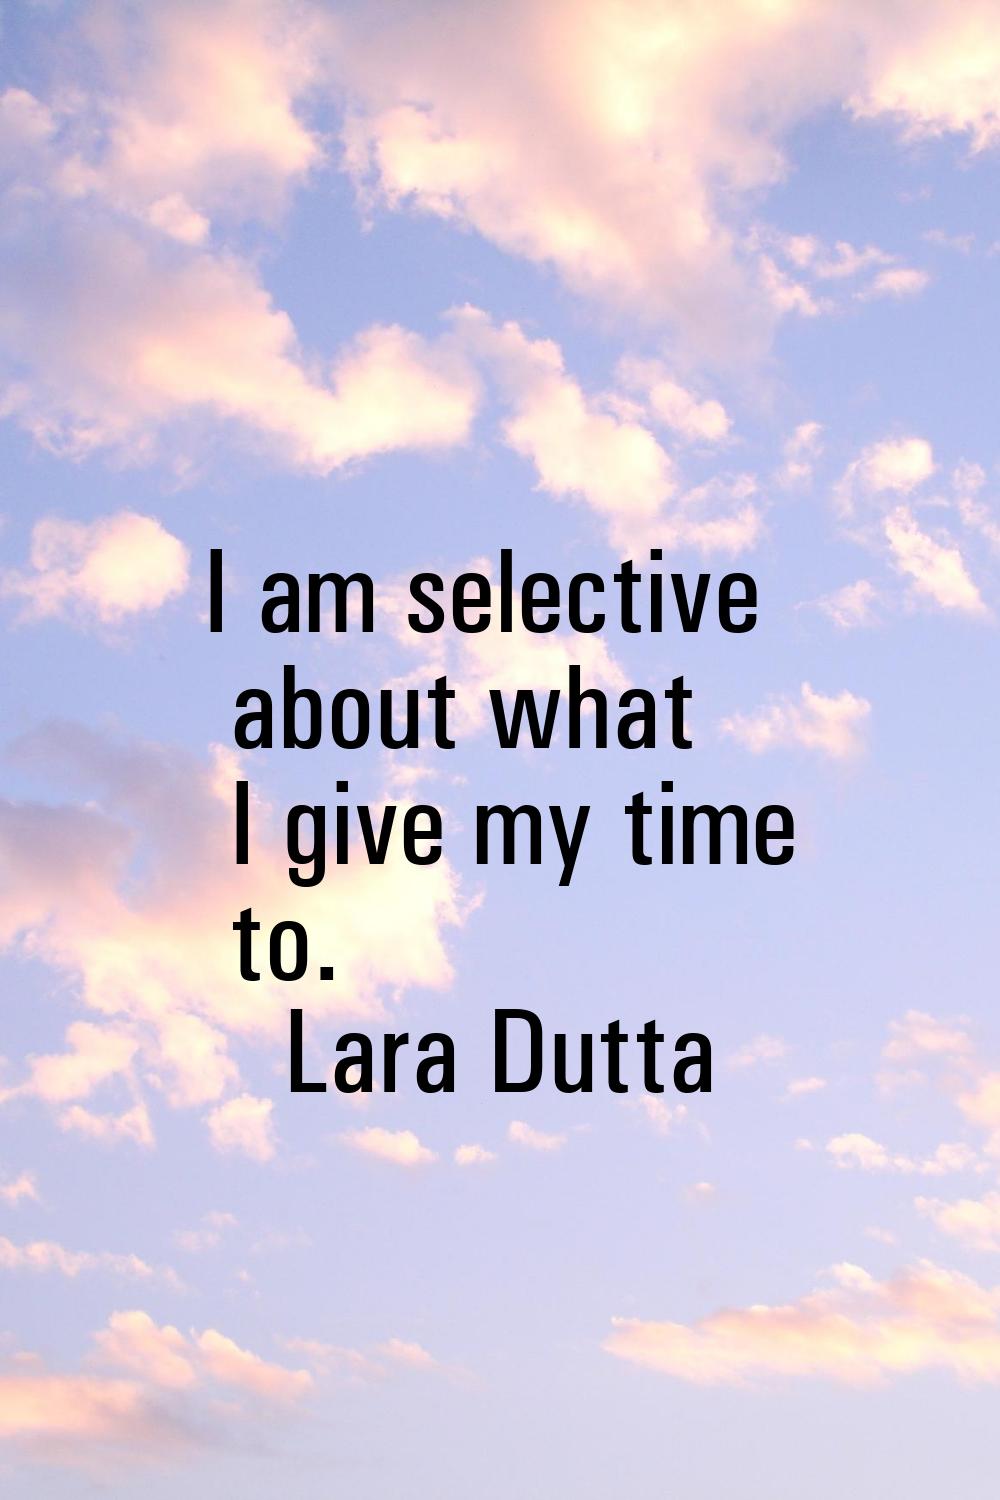 I am selective about what I give my time to.